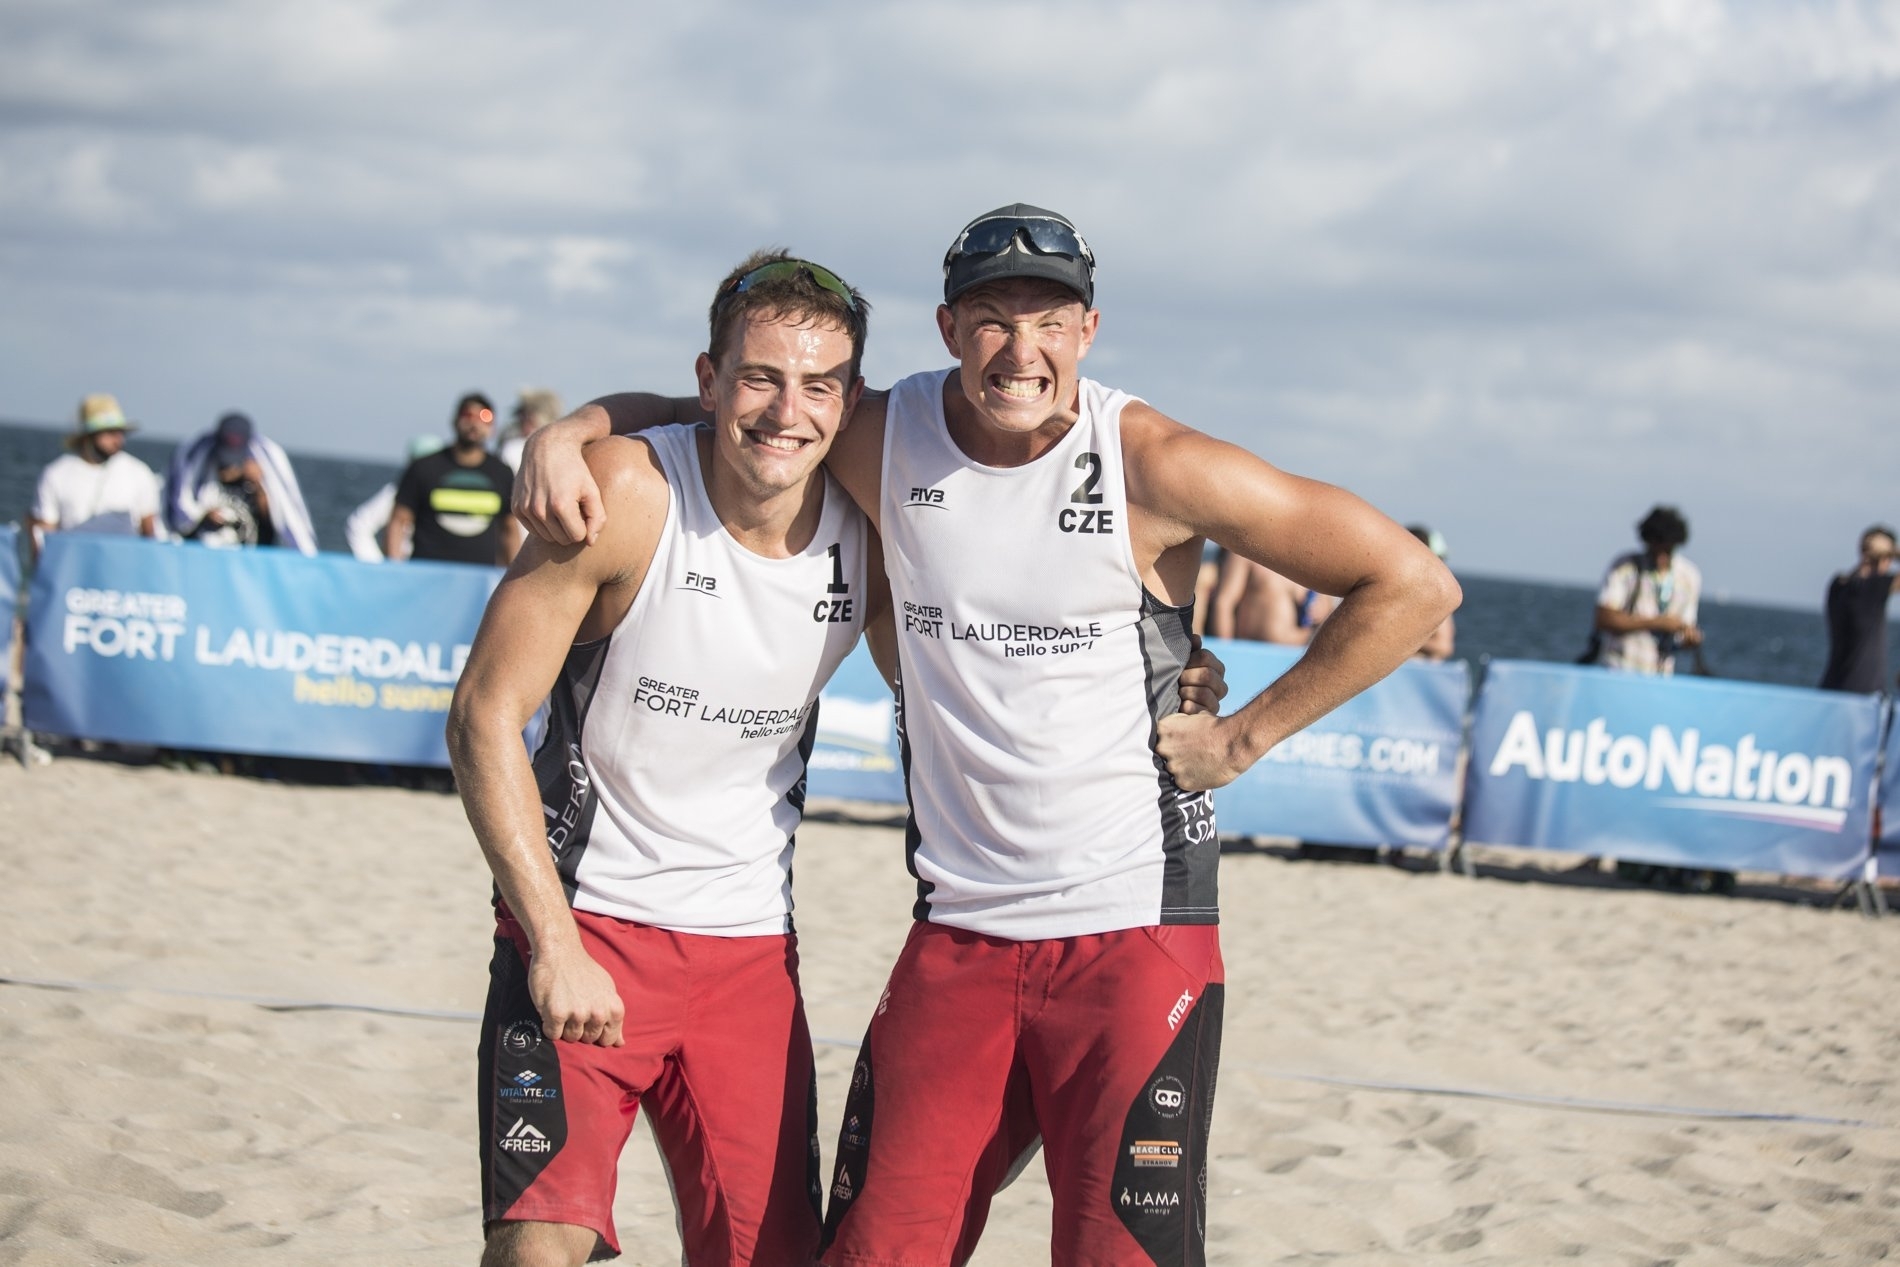 Perusic (left) and Schweiner were all smiles after their shock win over last year's champions